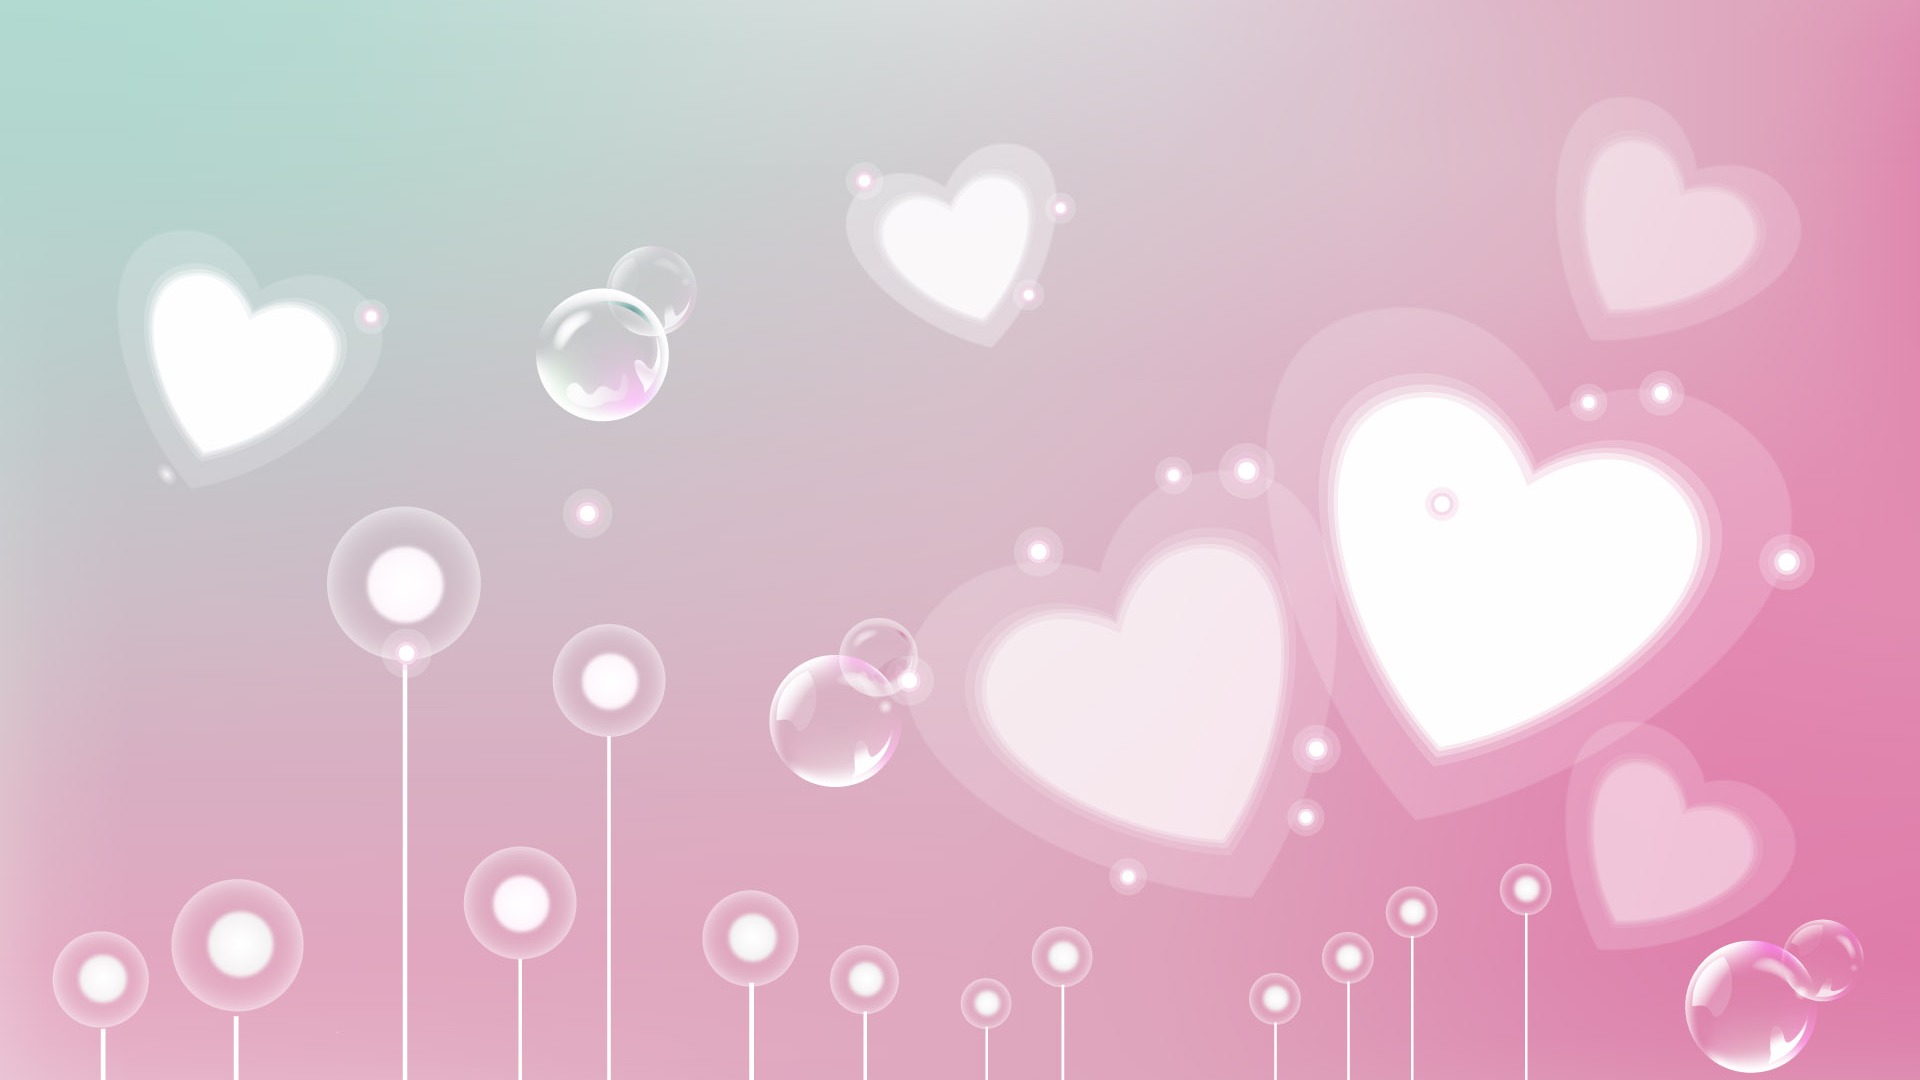 Valentine's Day Love Theme Wallpapers (2) #18 - 1920x1080